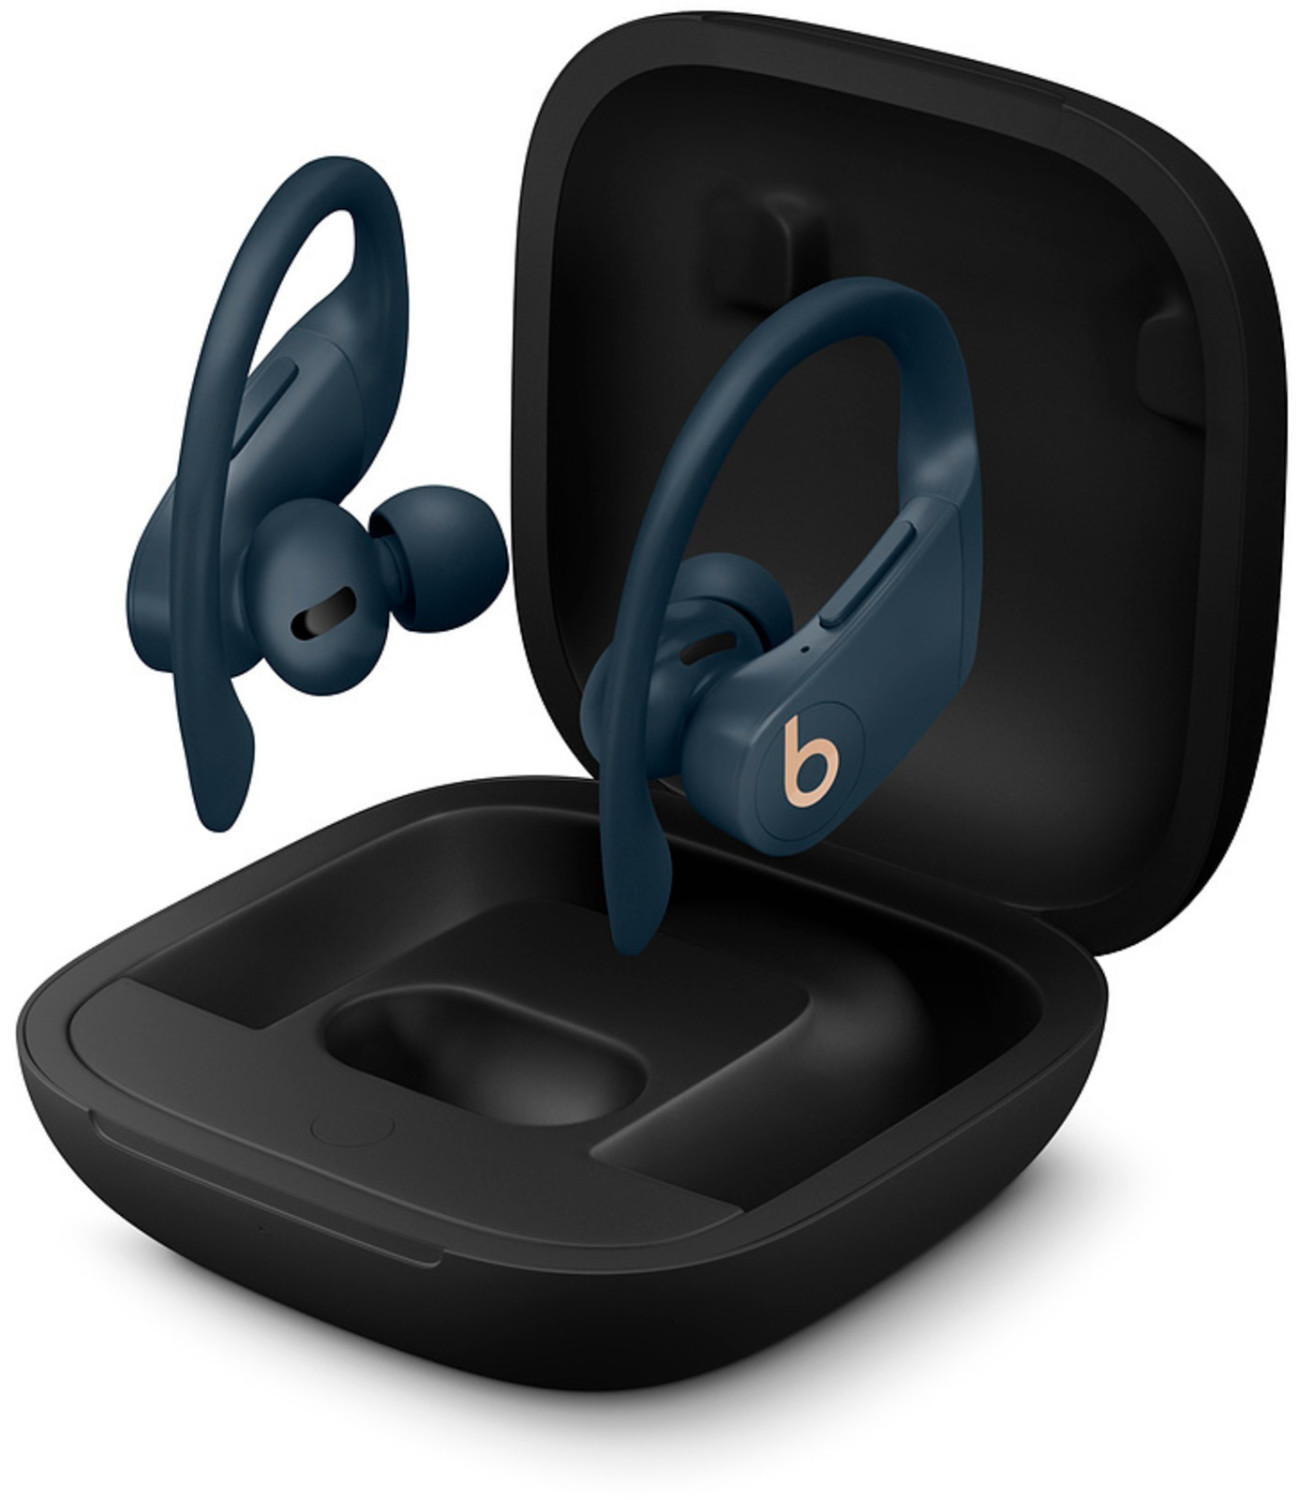 Buy Beats By Dre Powerbeats Pro Navy from £129.99 (Today) – Best Deals - Is There Powerbeats Pro Black Friday Deal